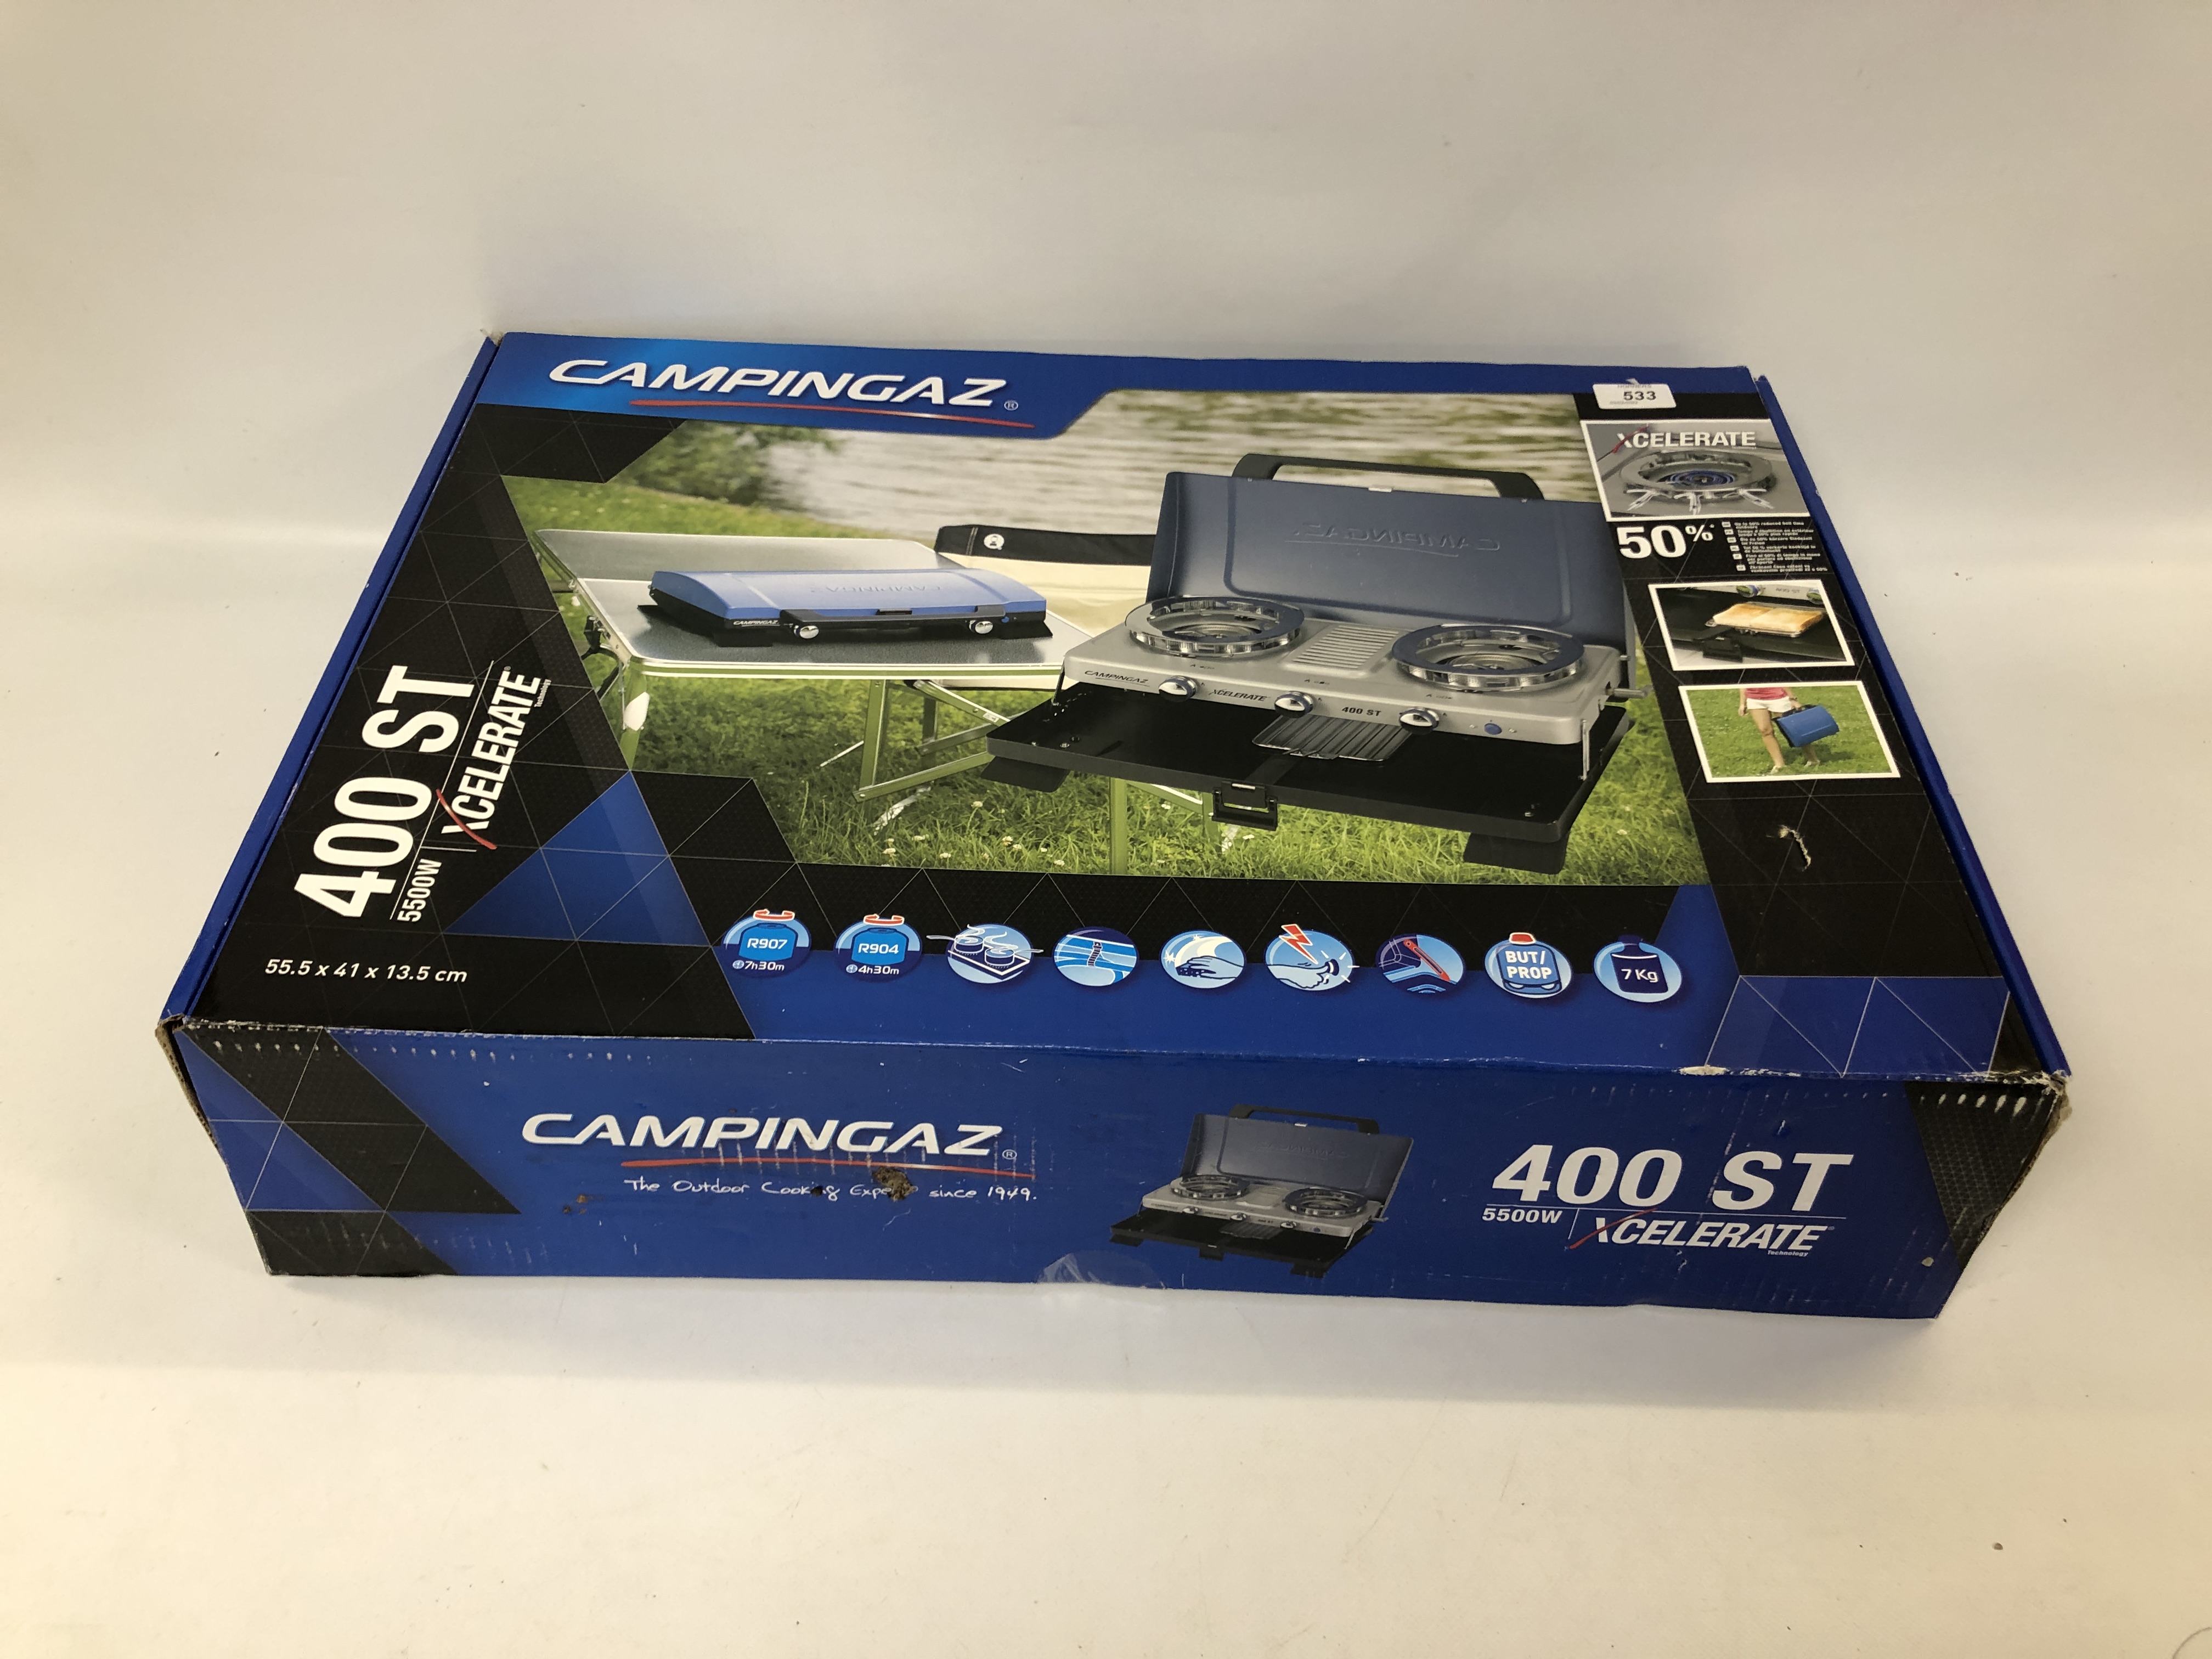 BOXED AS NEW CAMPINGAZ 400 ST 5500W CAMPING STOVE